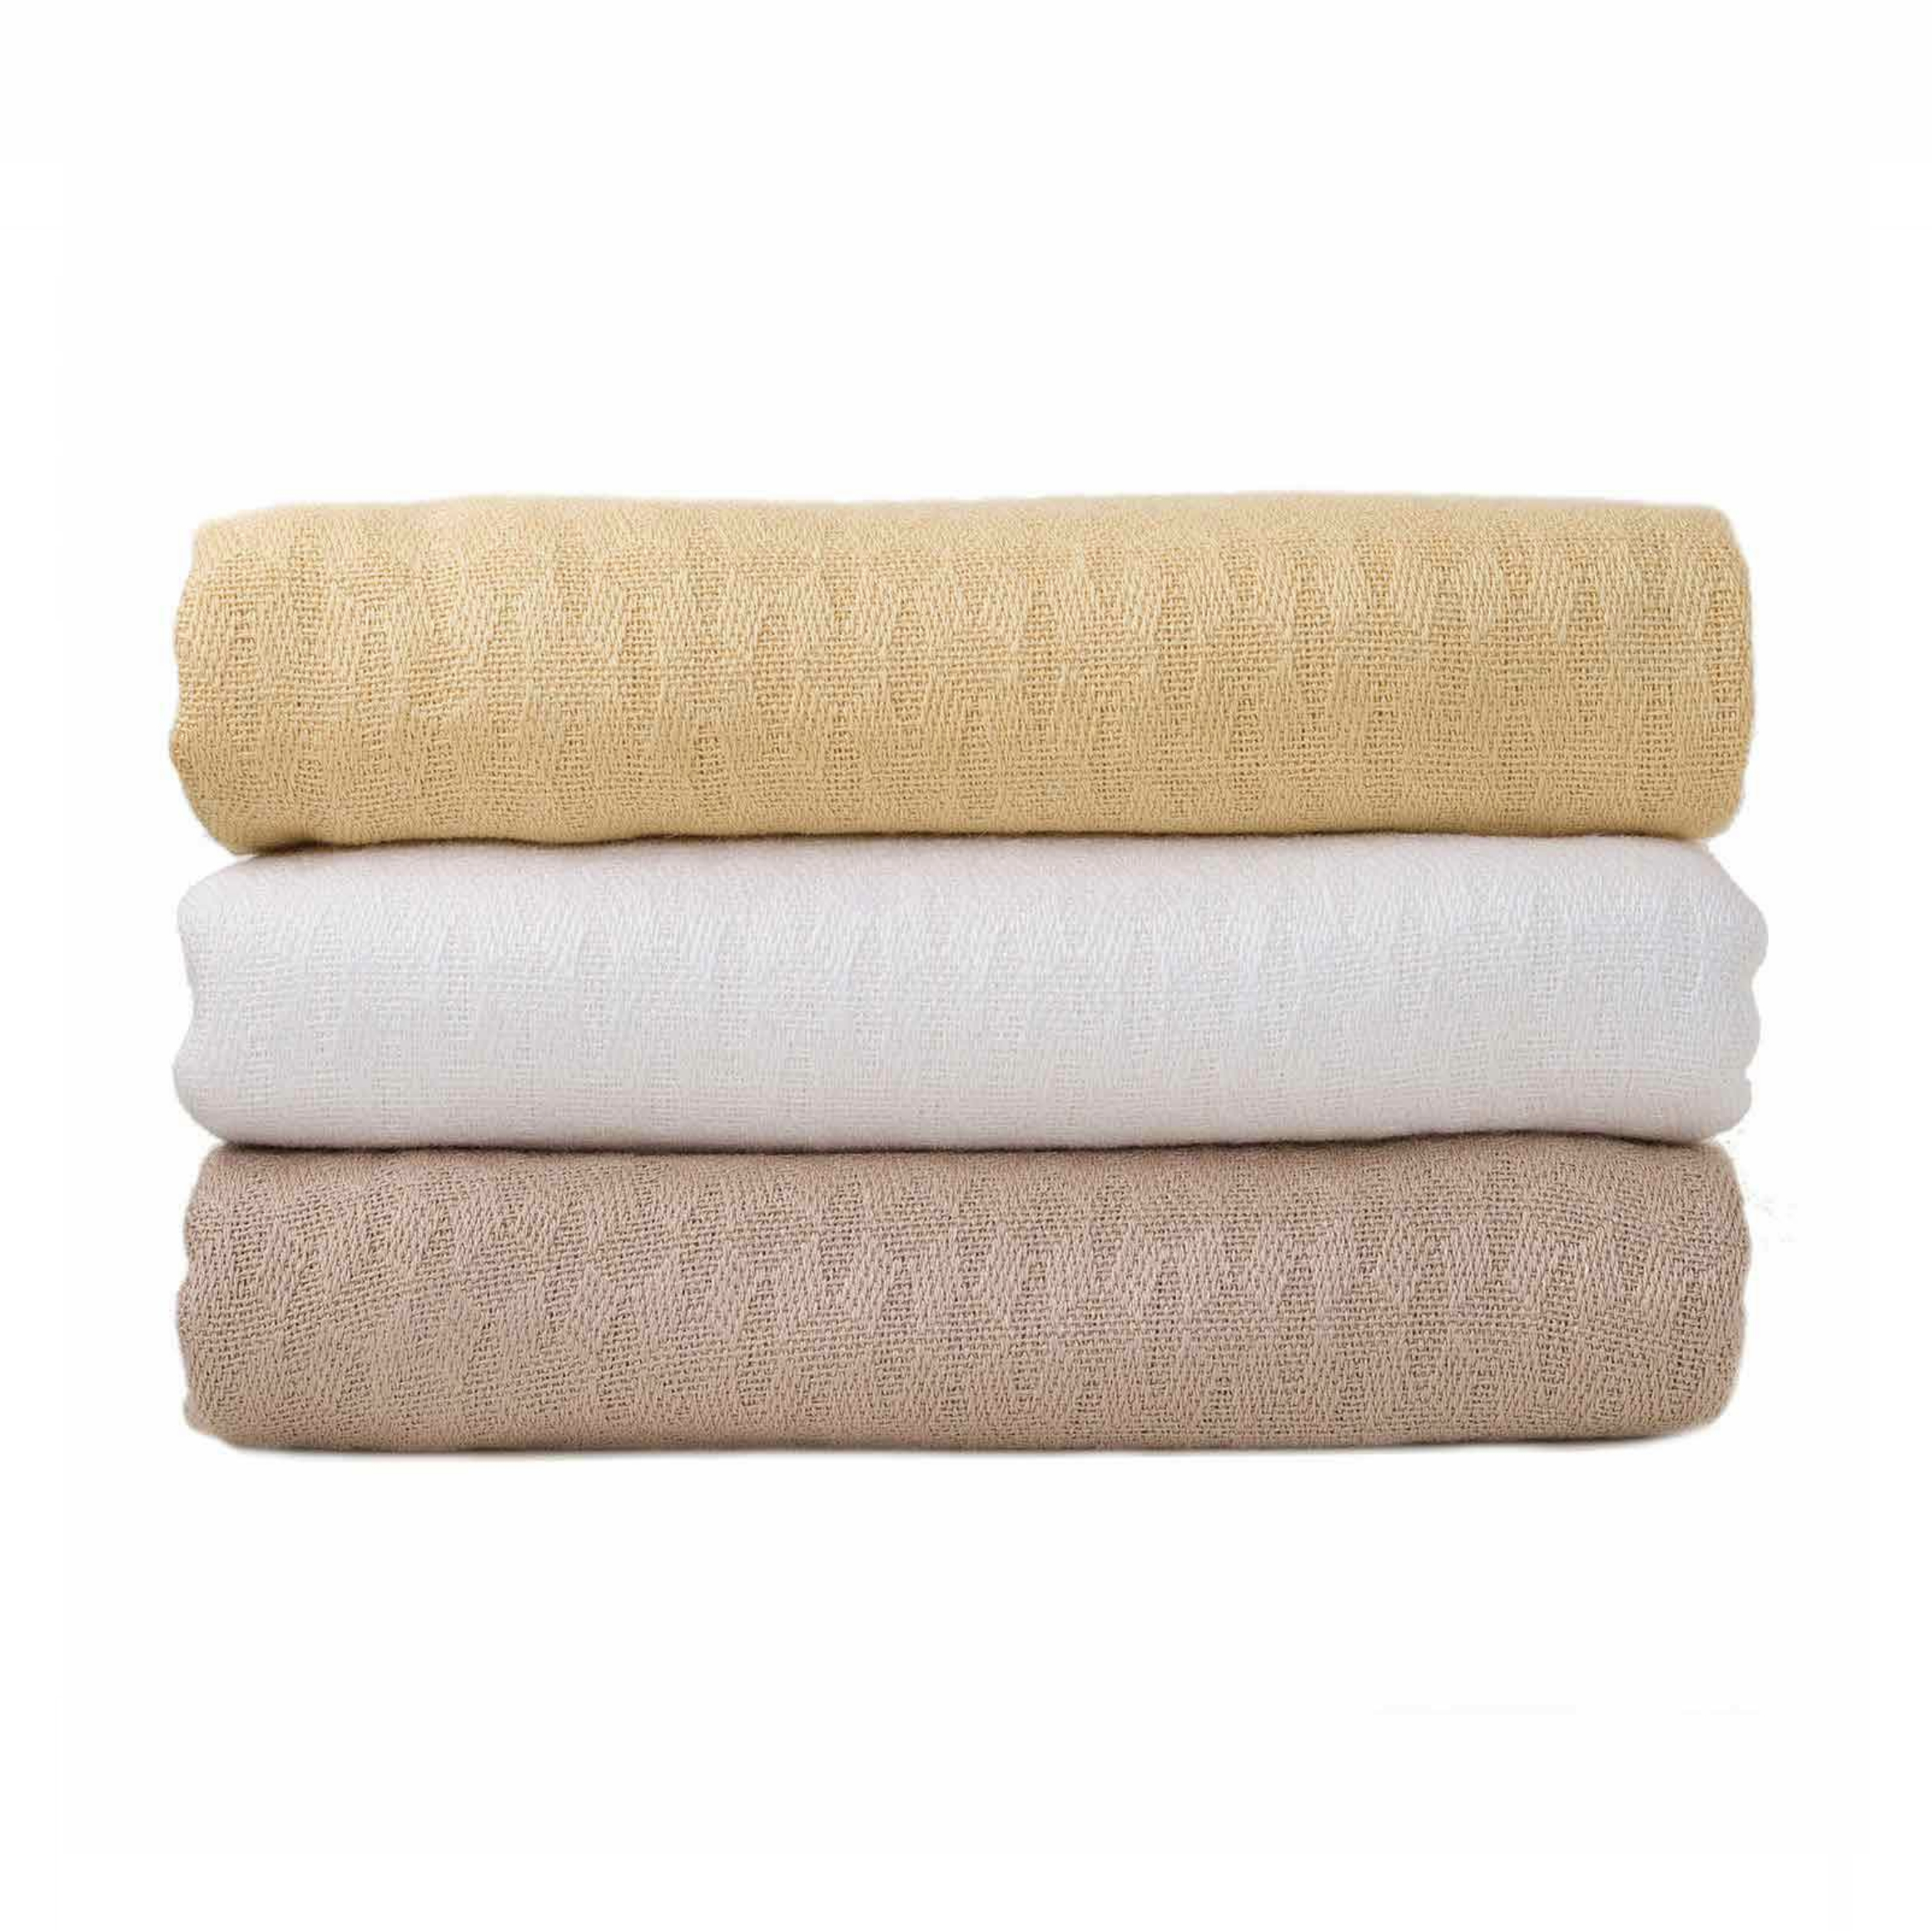 Bamboo Blankets & Throws